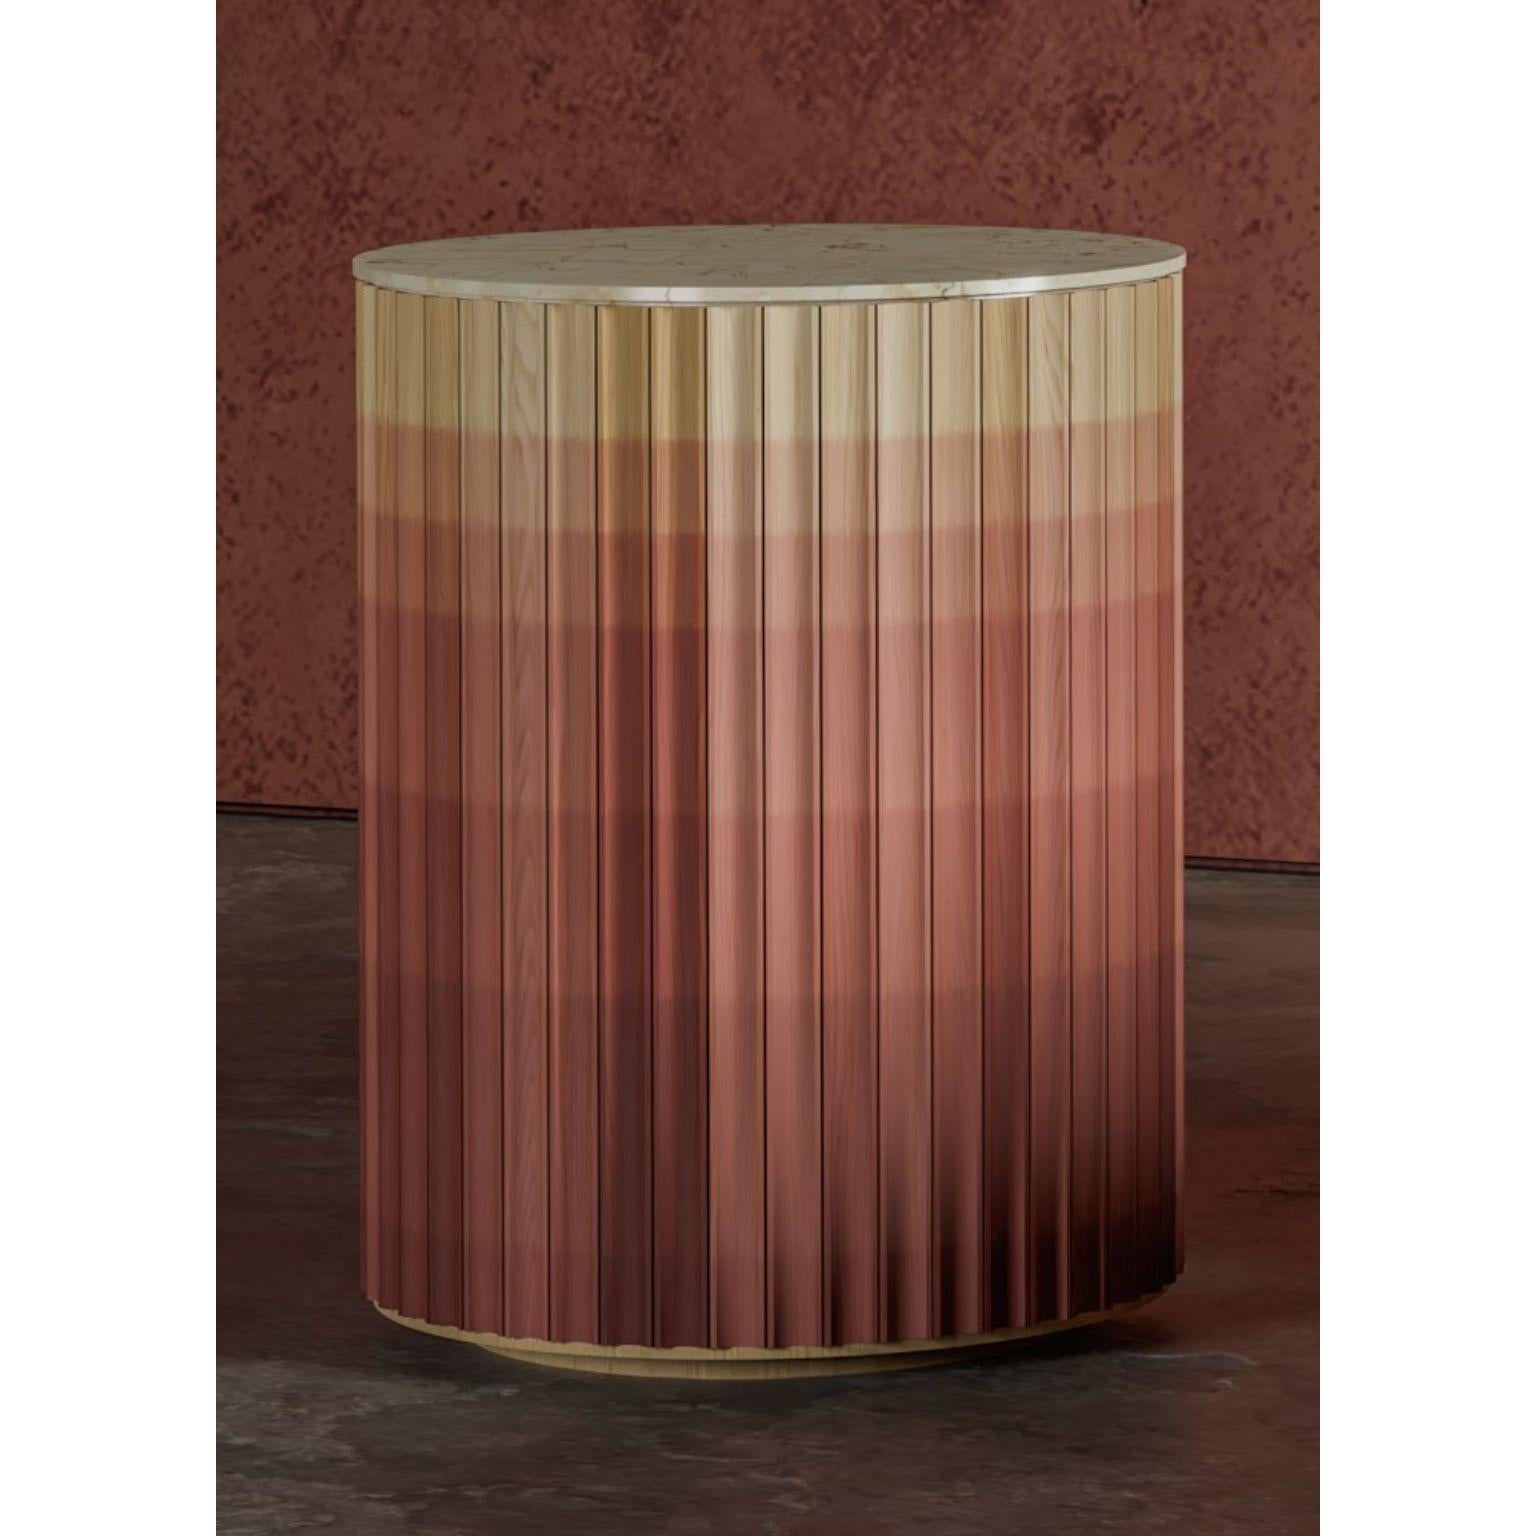 Pilar end table by Indo Made
One of a kind.
Dimensions: Ø40.6 X H53.3 cm 
Materials: Oak with ombre finish, Crema Marfil Marble top

Also available in other materials and finishes.
Each piece is carefully handcrafted by our team using natural